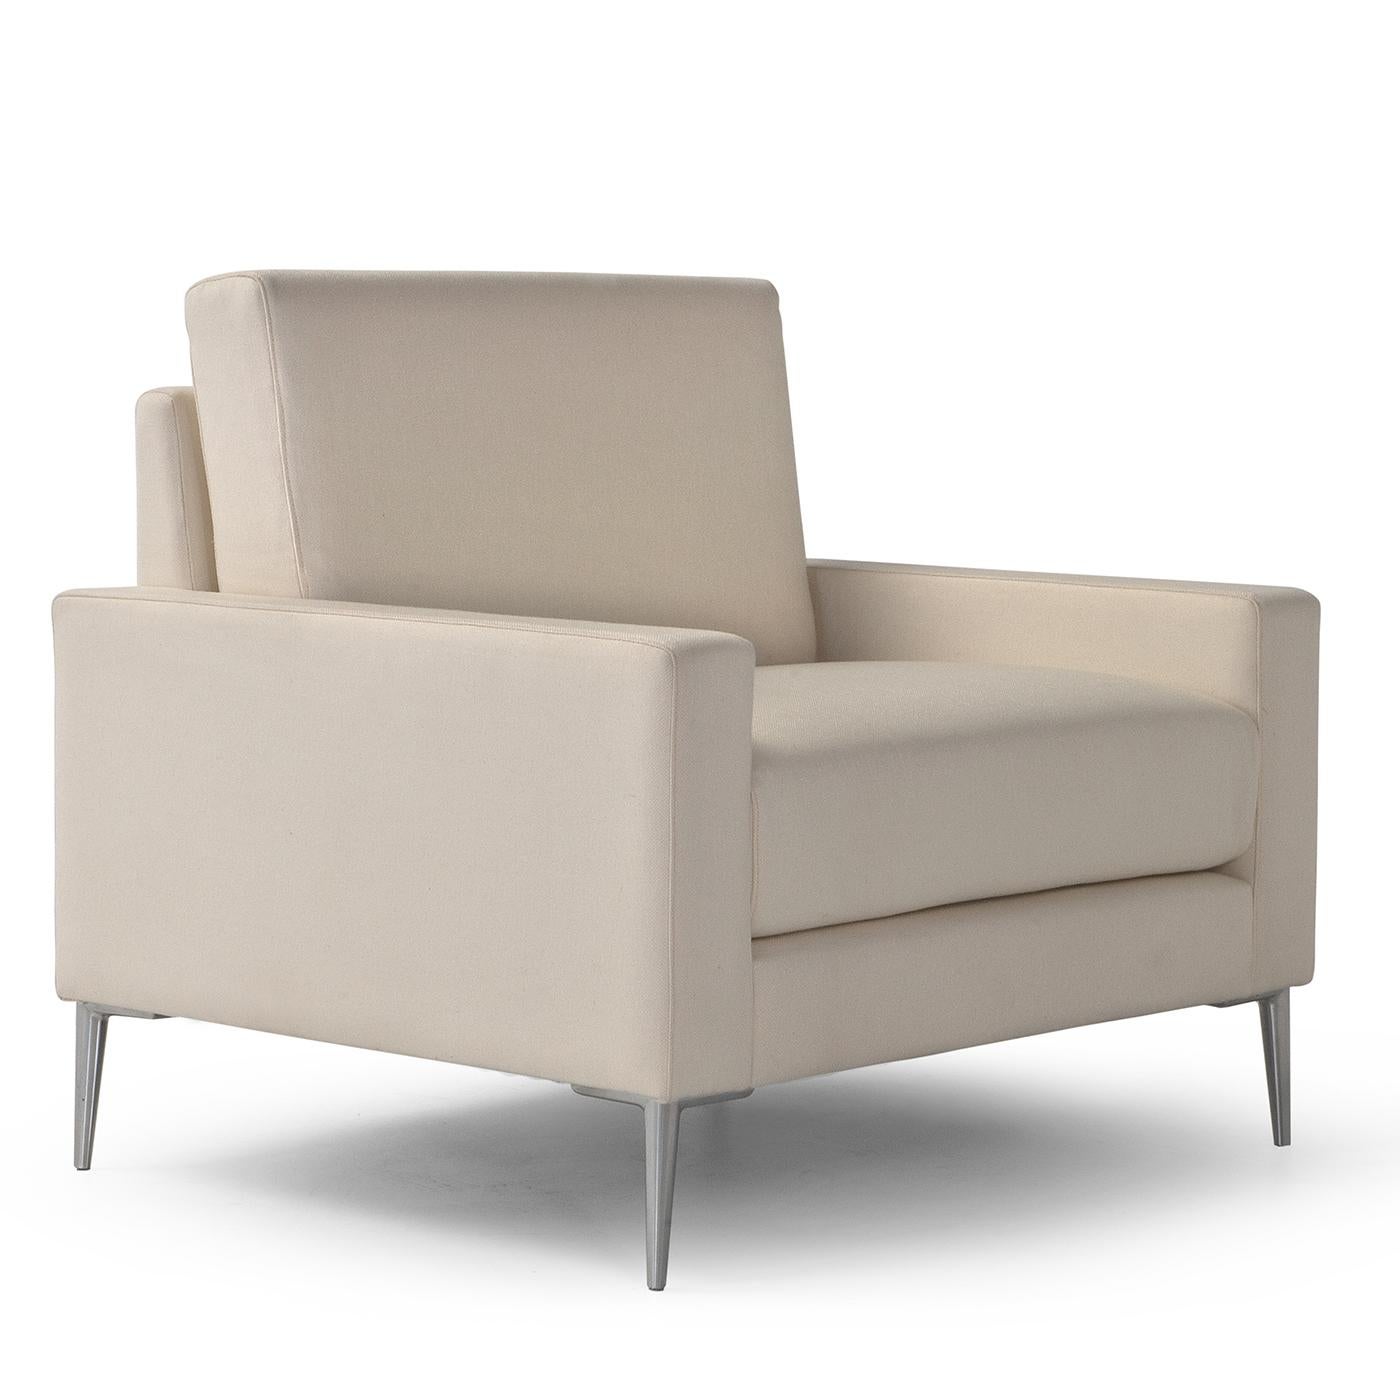 Inspired by the iconic design of the mid-century, the Boston Collection of armchairs offers a timeless and elegant look in several options for the supporting base. The ivory Dacron upholstery paired with the polished chrome legs make this armchair a